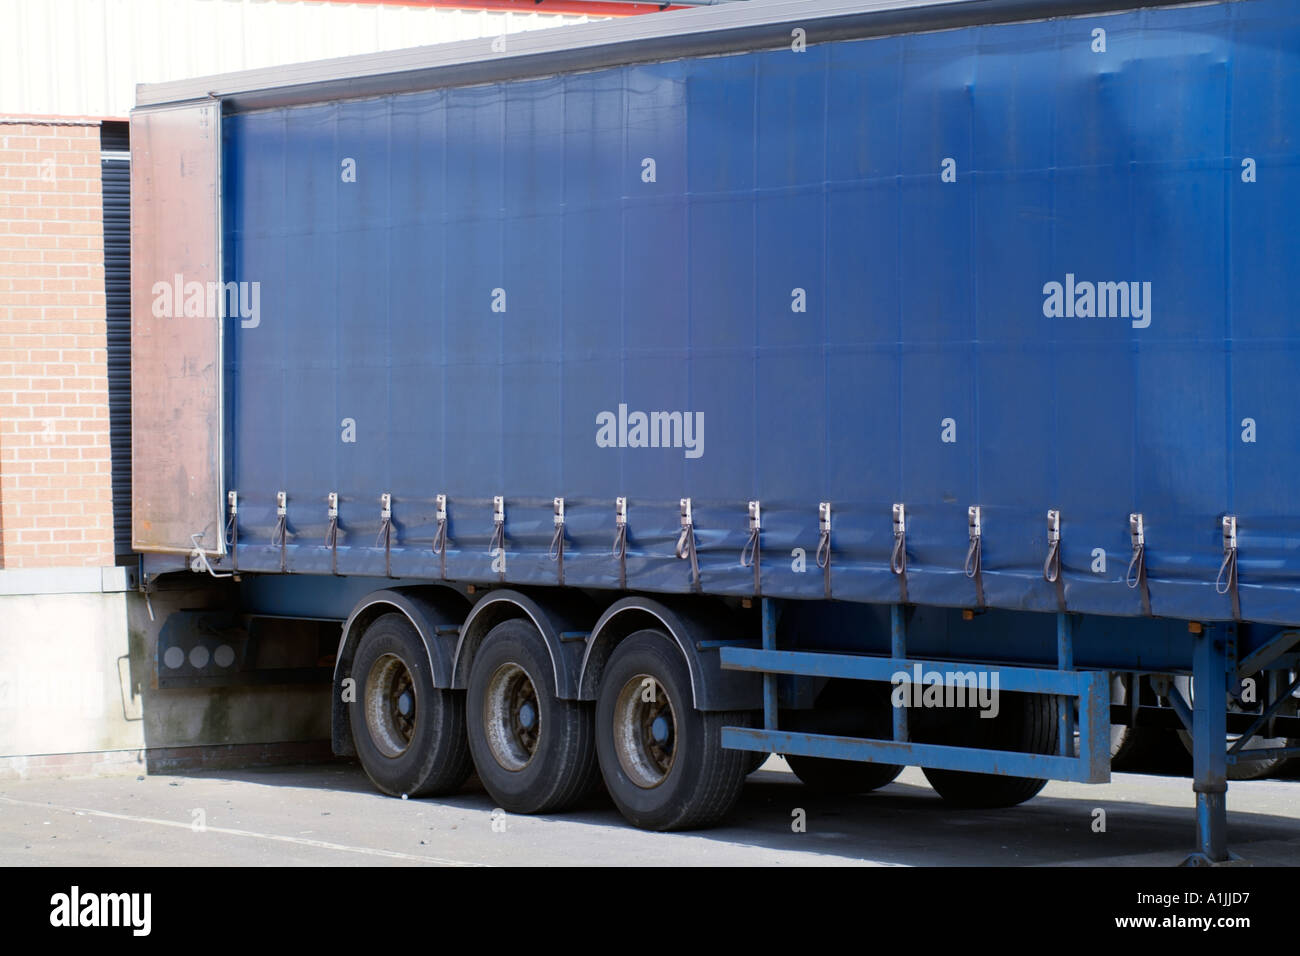 Articulated lorry unloading at unloading bay deliver transport transportation logistics road haulage lorry truck load unload fac Stock Photo